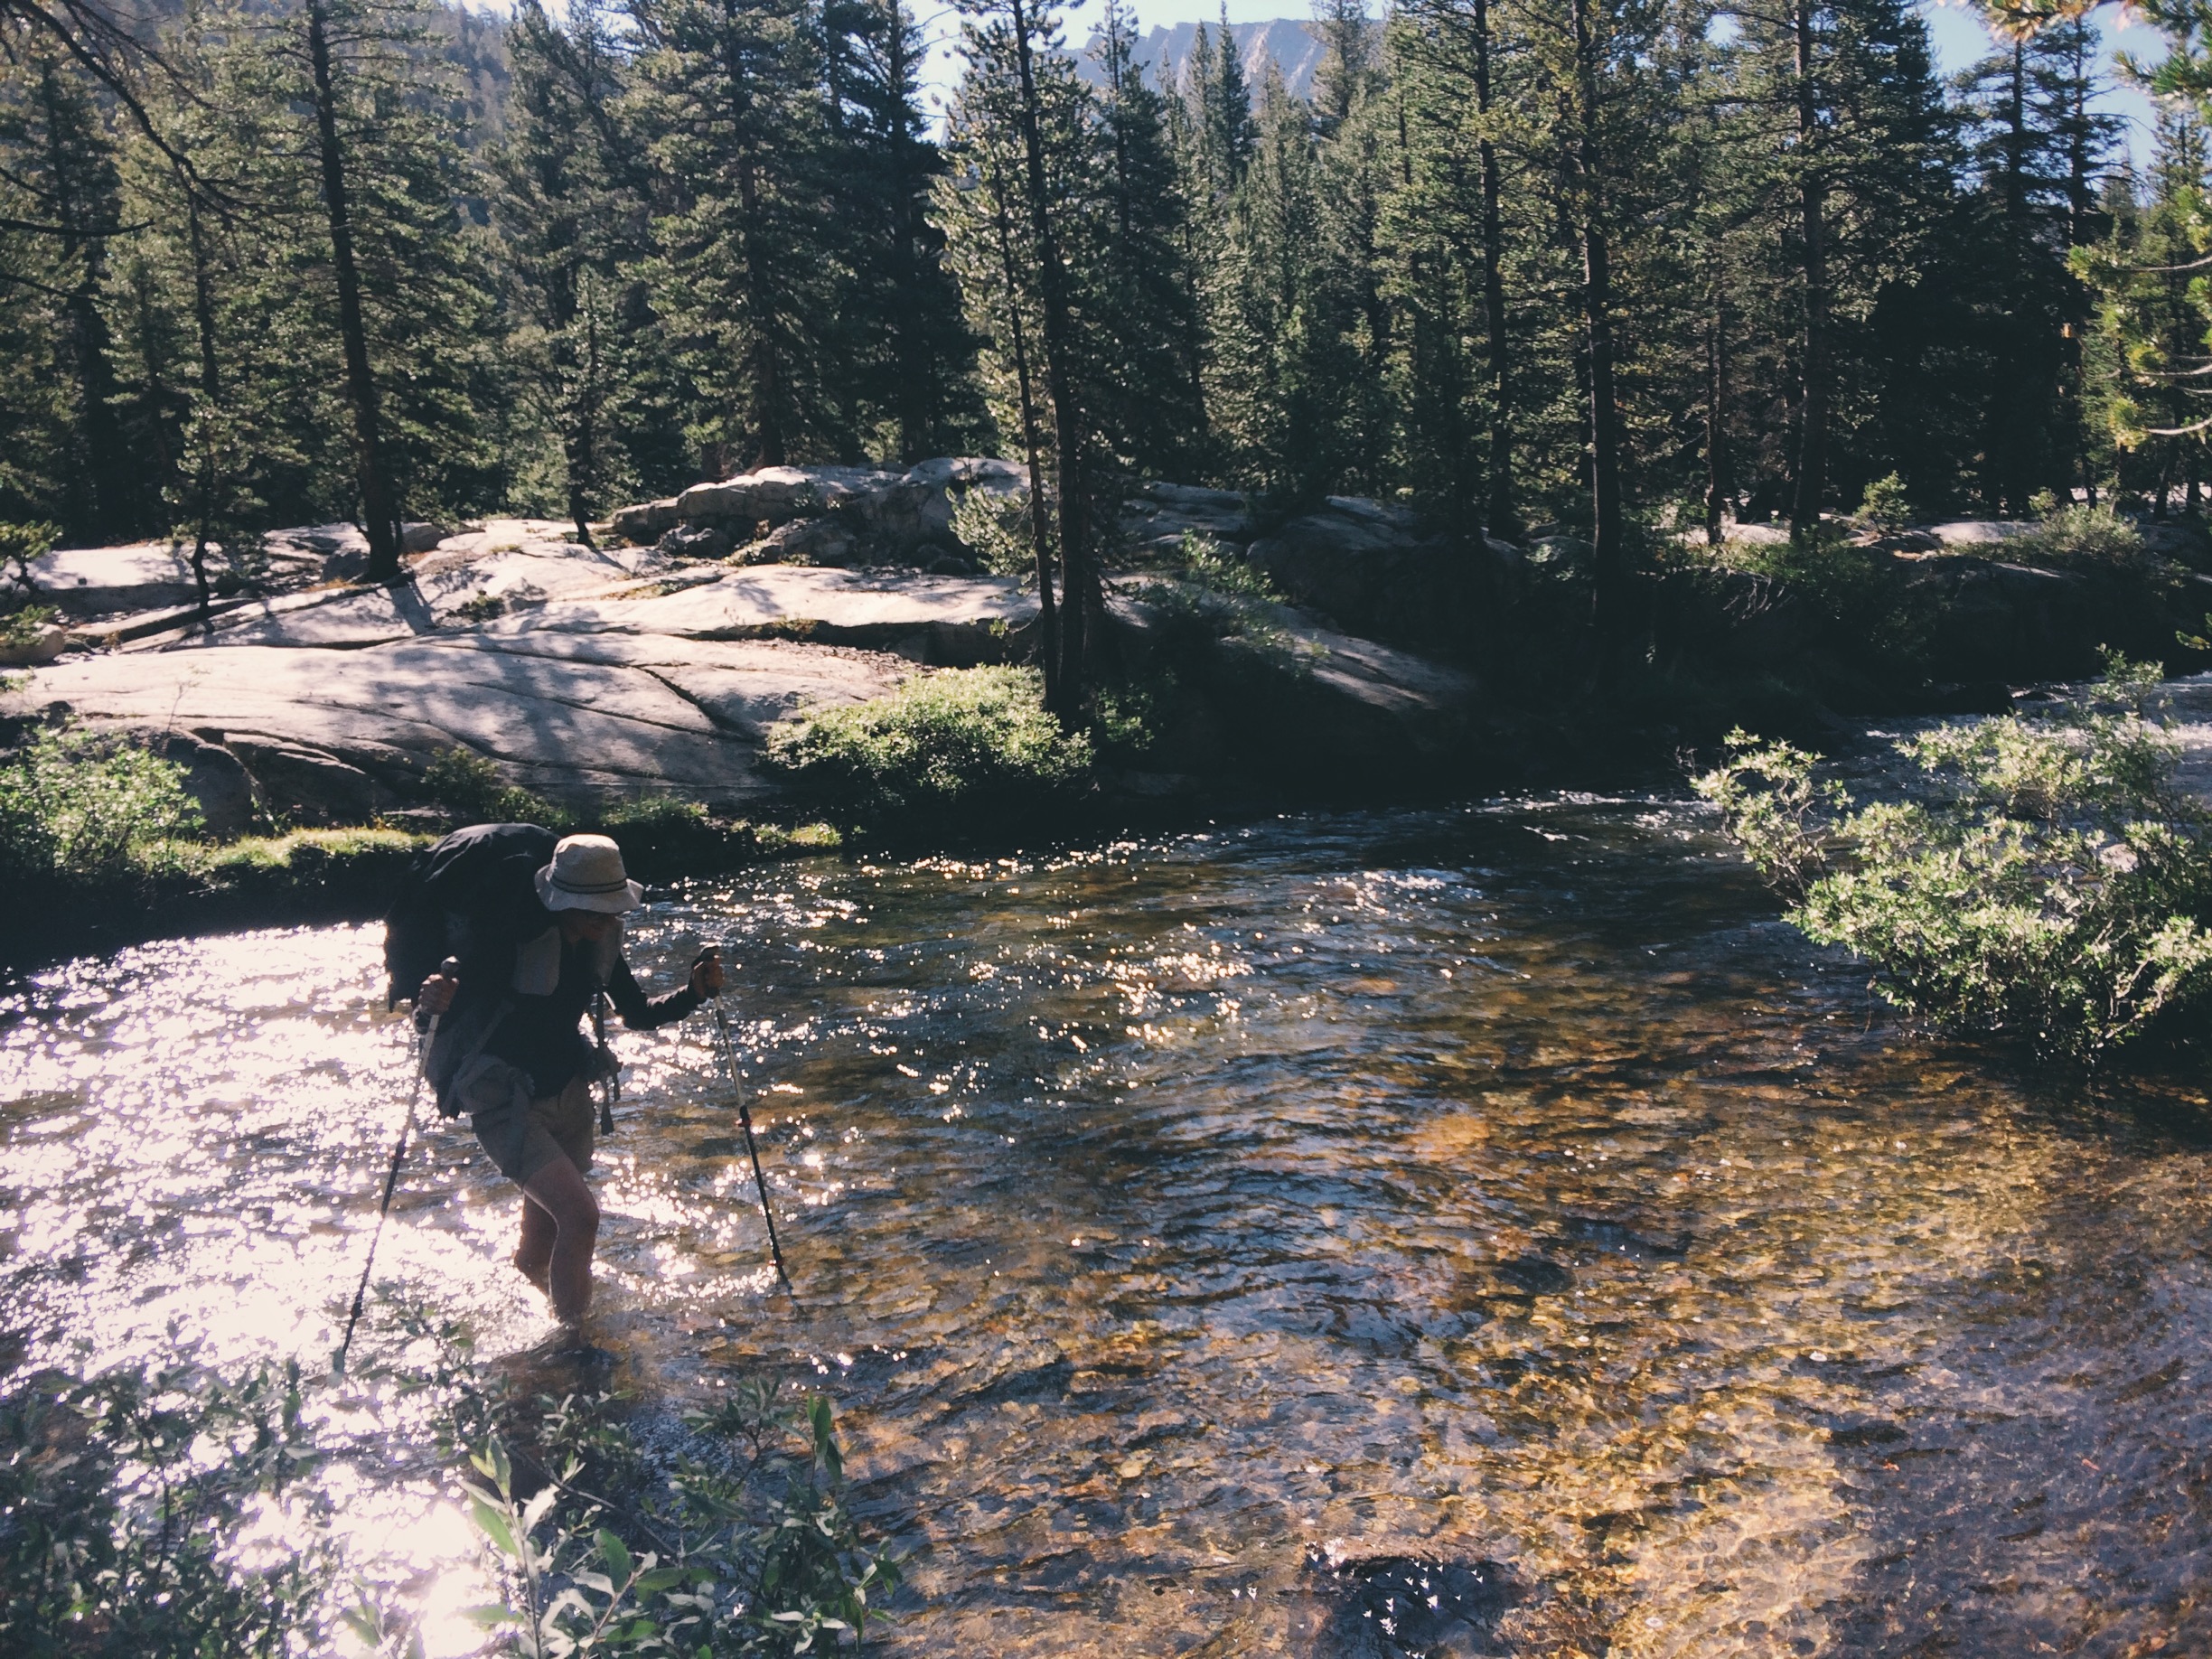  Crossing Bear Creek, one of only two stream crossings on the JMT that required us to change out of our boots during this drought year.&nbsp; 